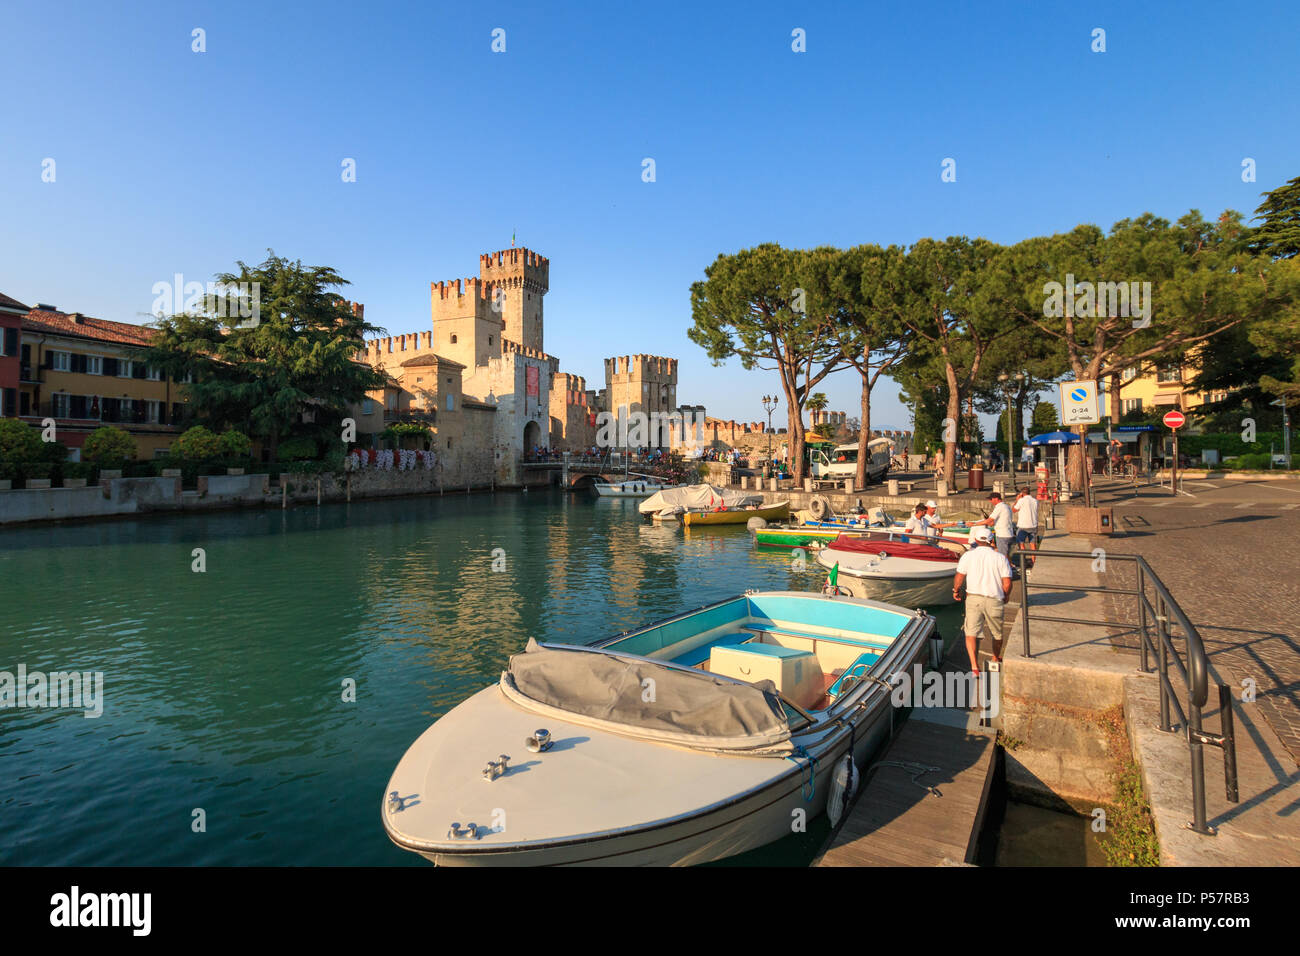 Sirmione, Italy – May 27, 2017: Scaliger castle in the old town of ...